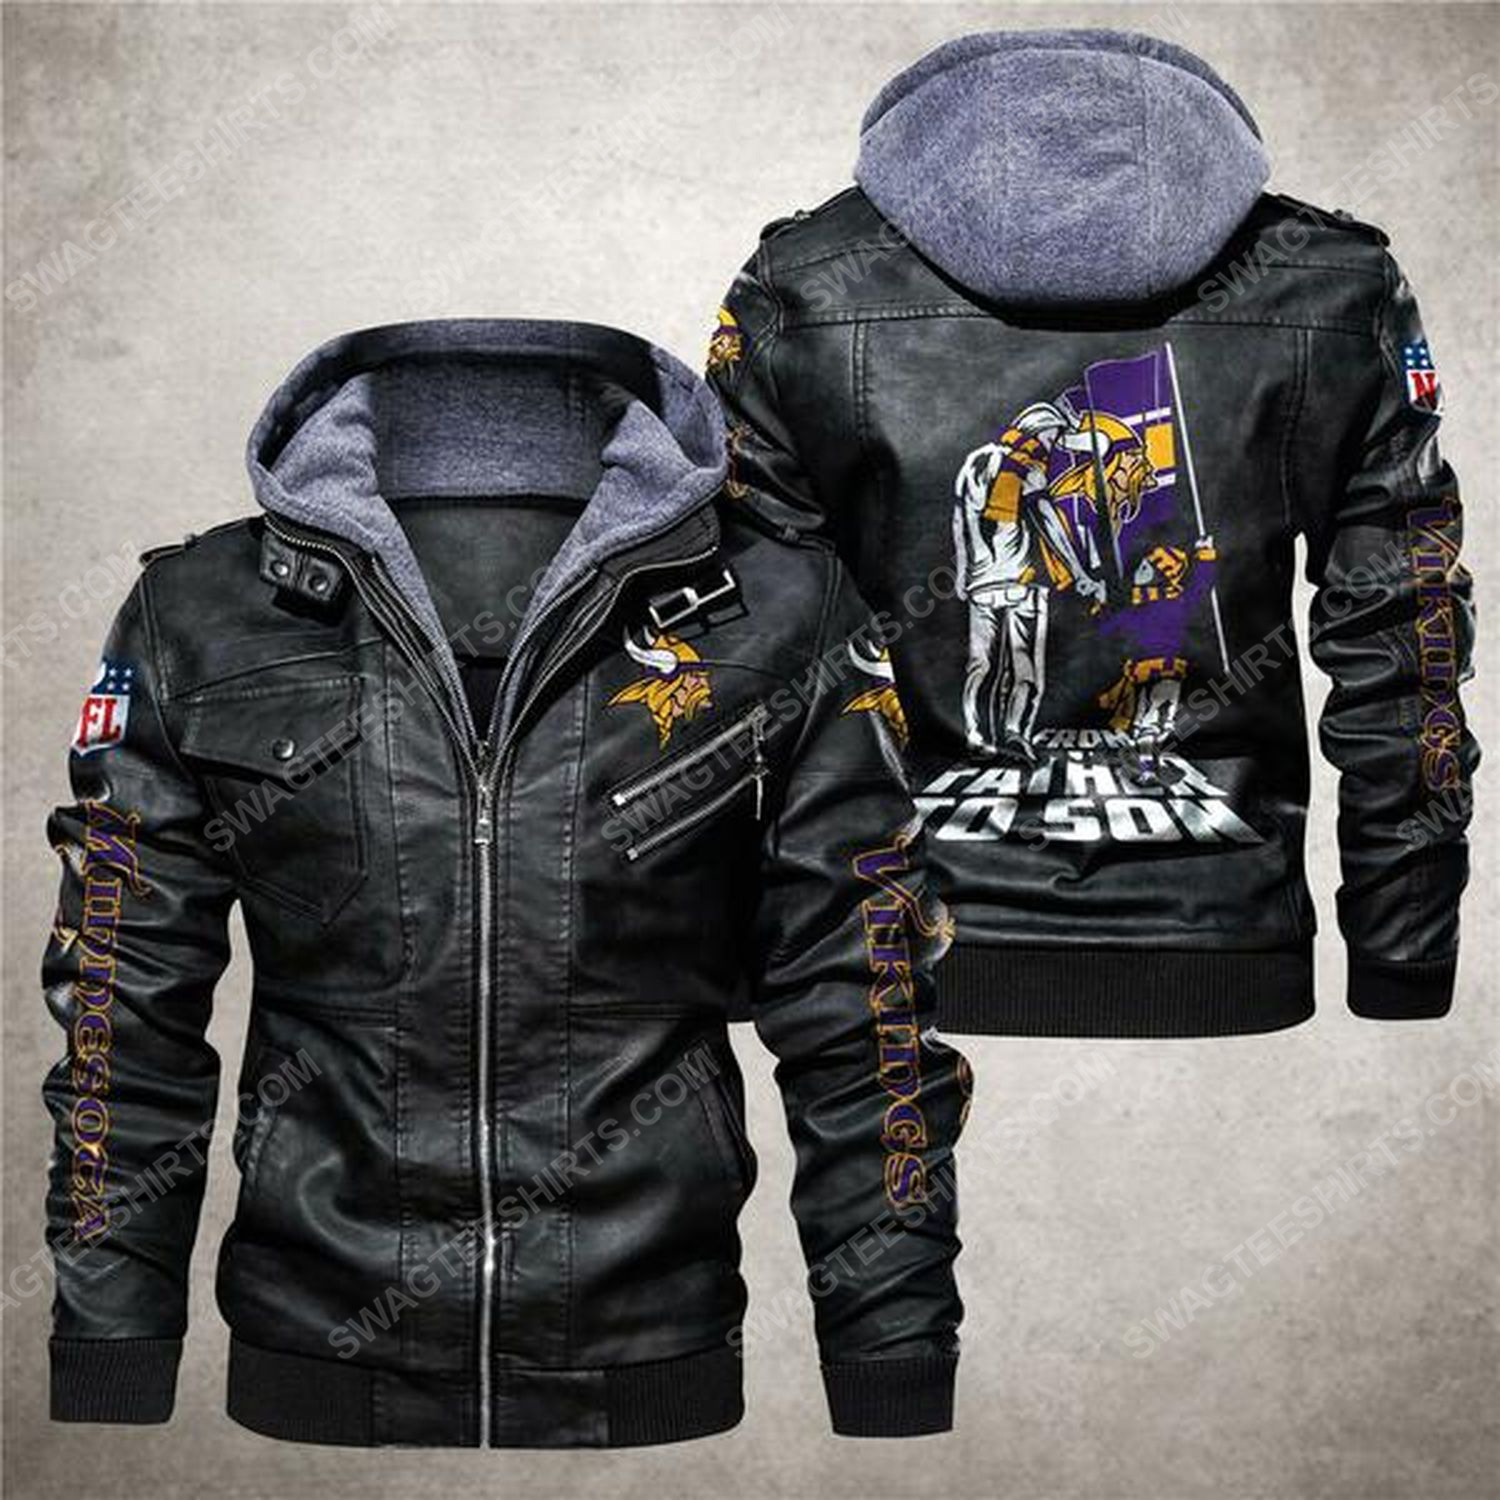 [special edition] National football league minnesota vikings from father to son leather jacket – Maria